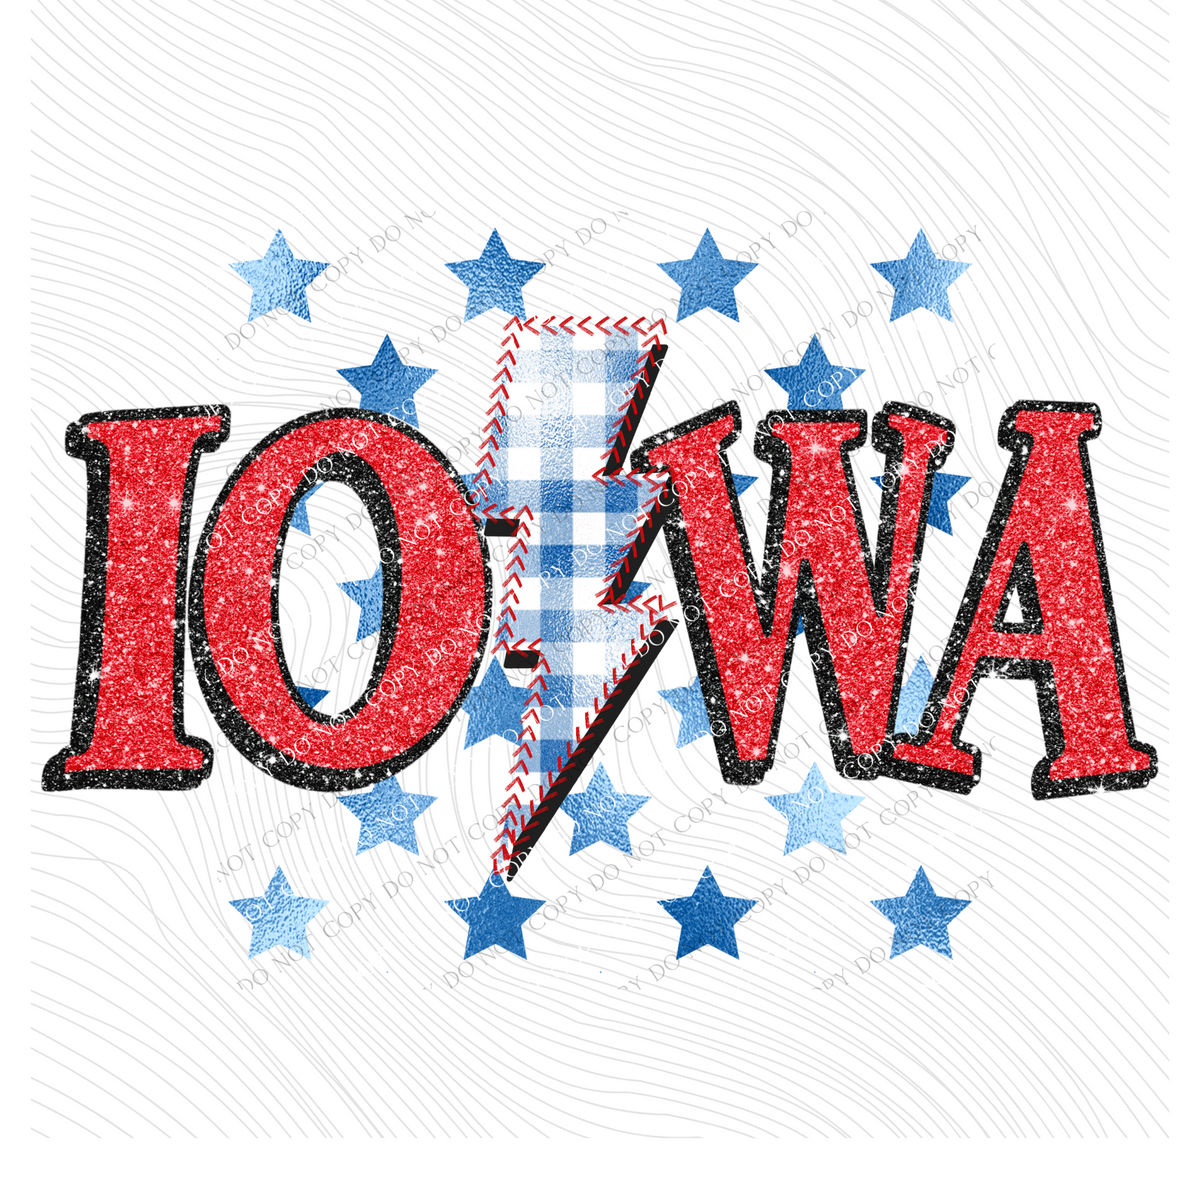 Iowa Glitter with Foil Stars & Gingham Stitched Bolt in Red, White & Blue Patriotic Digital Design, PNG